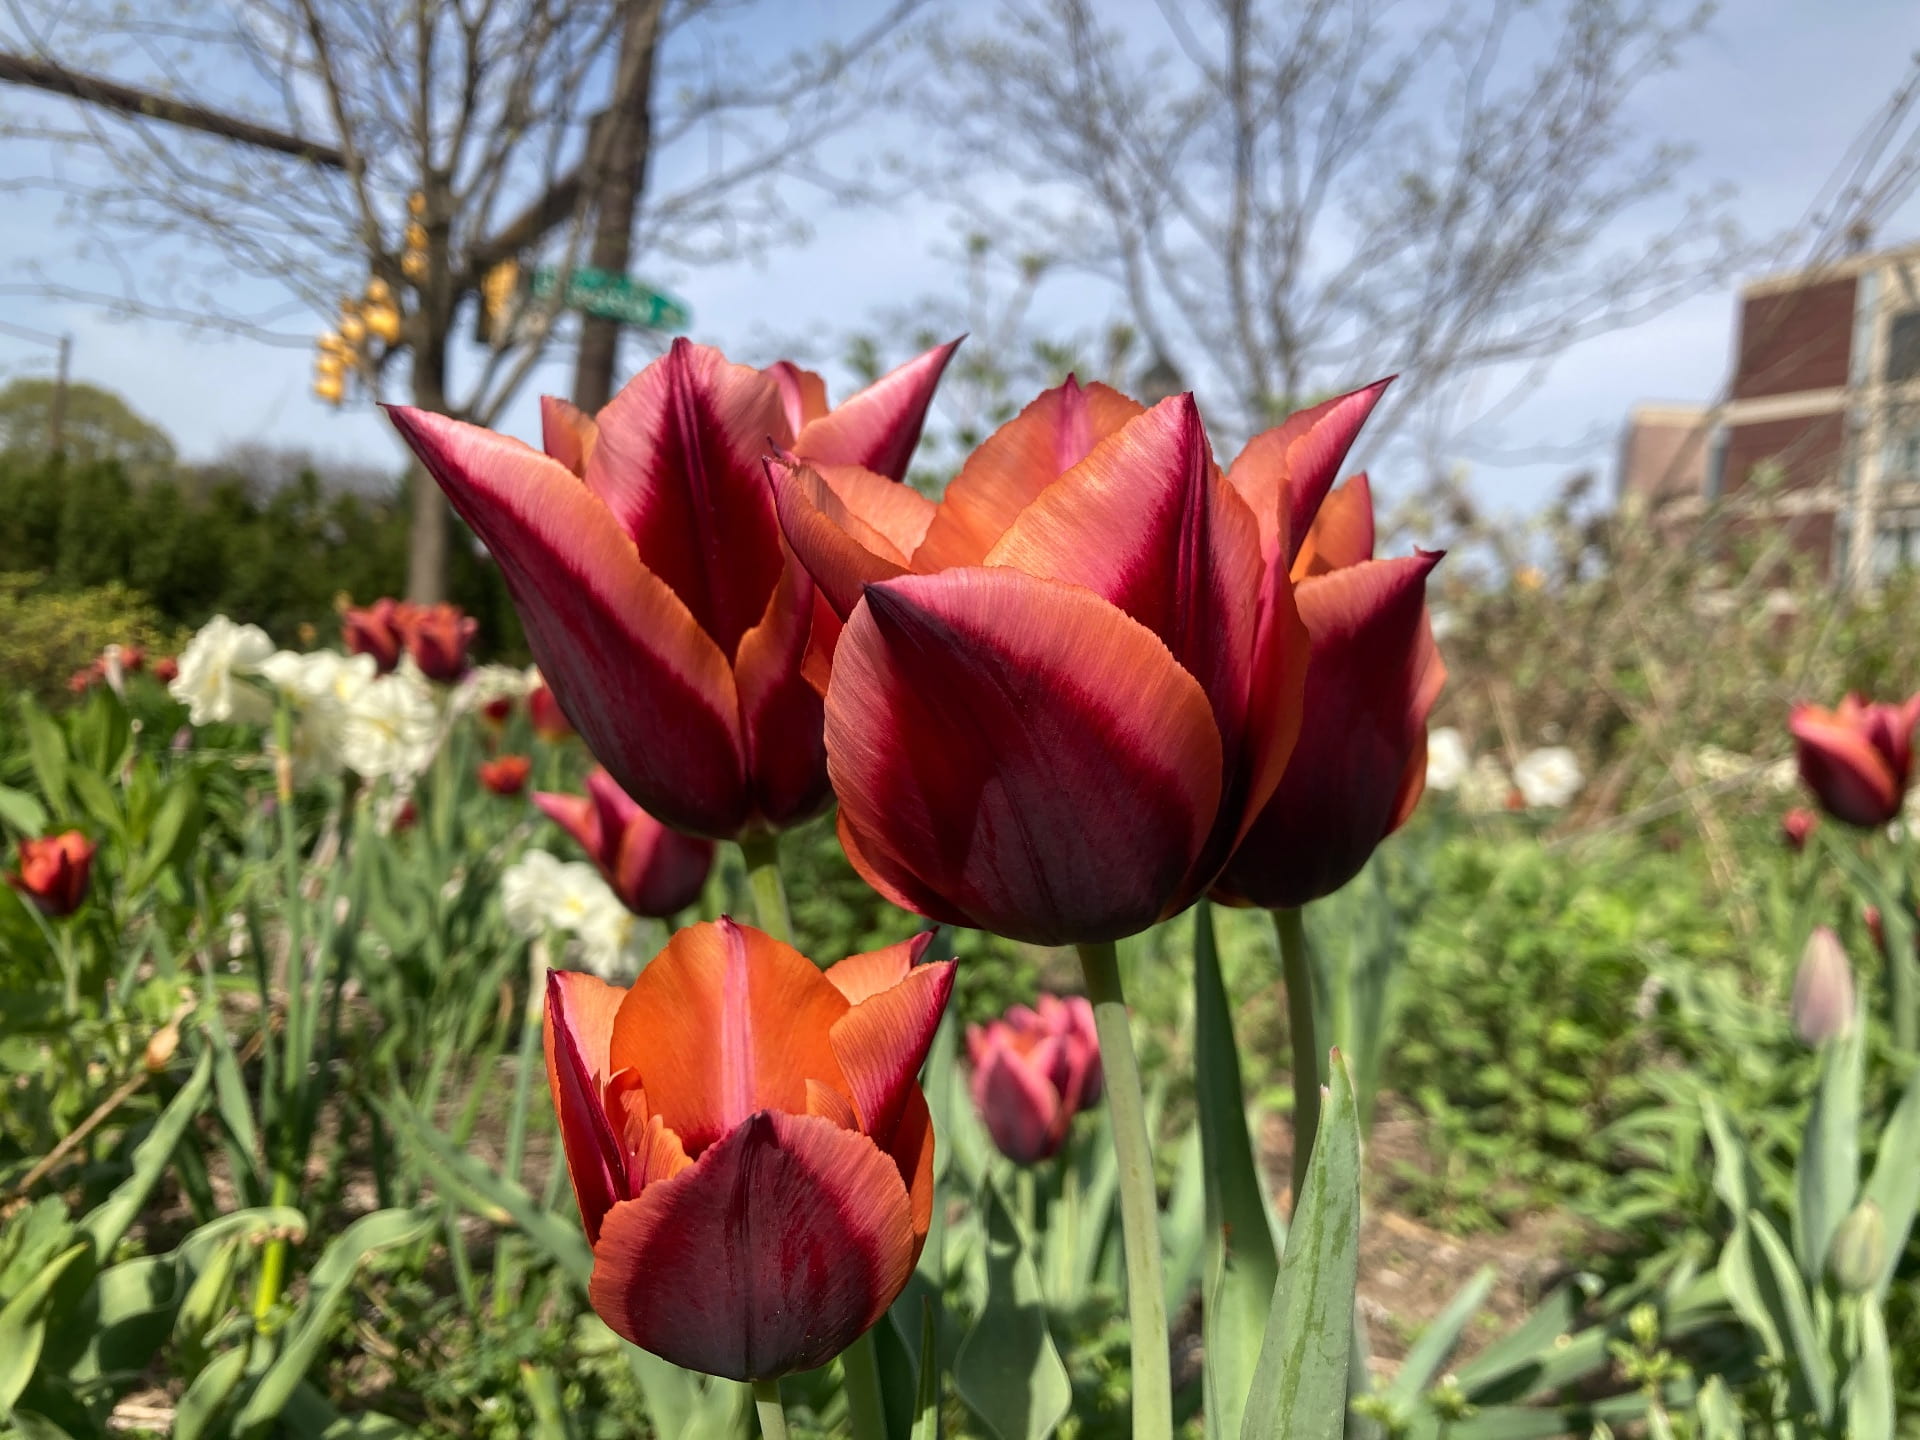 Tulipa 'Sonnet' is blooming now on the plaza.